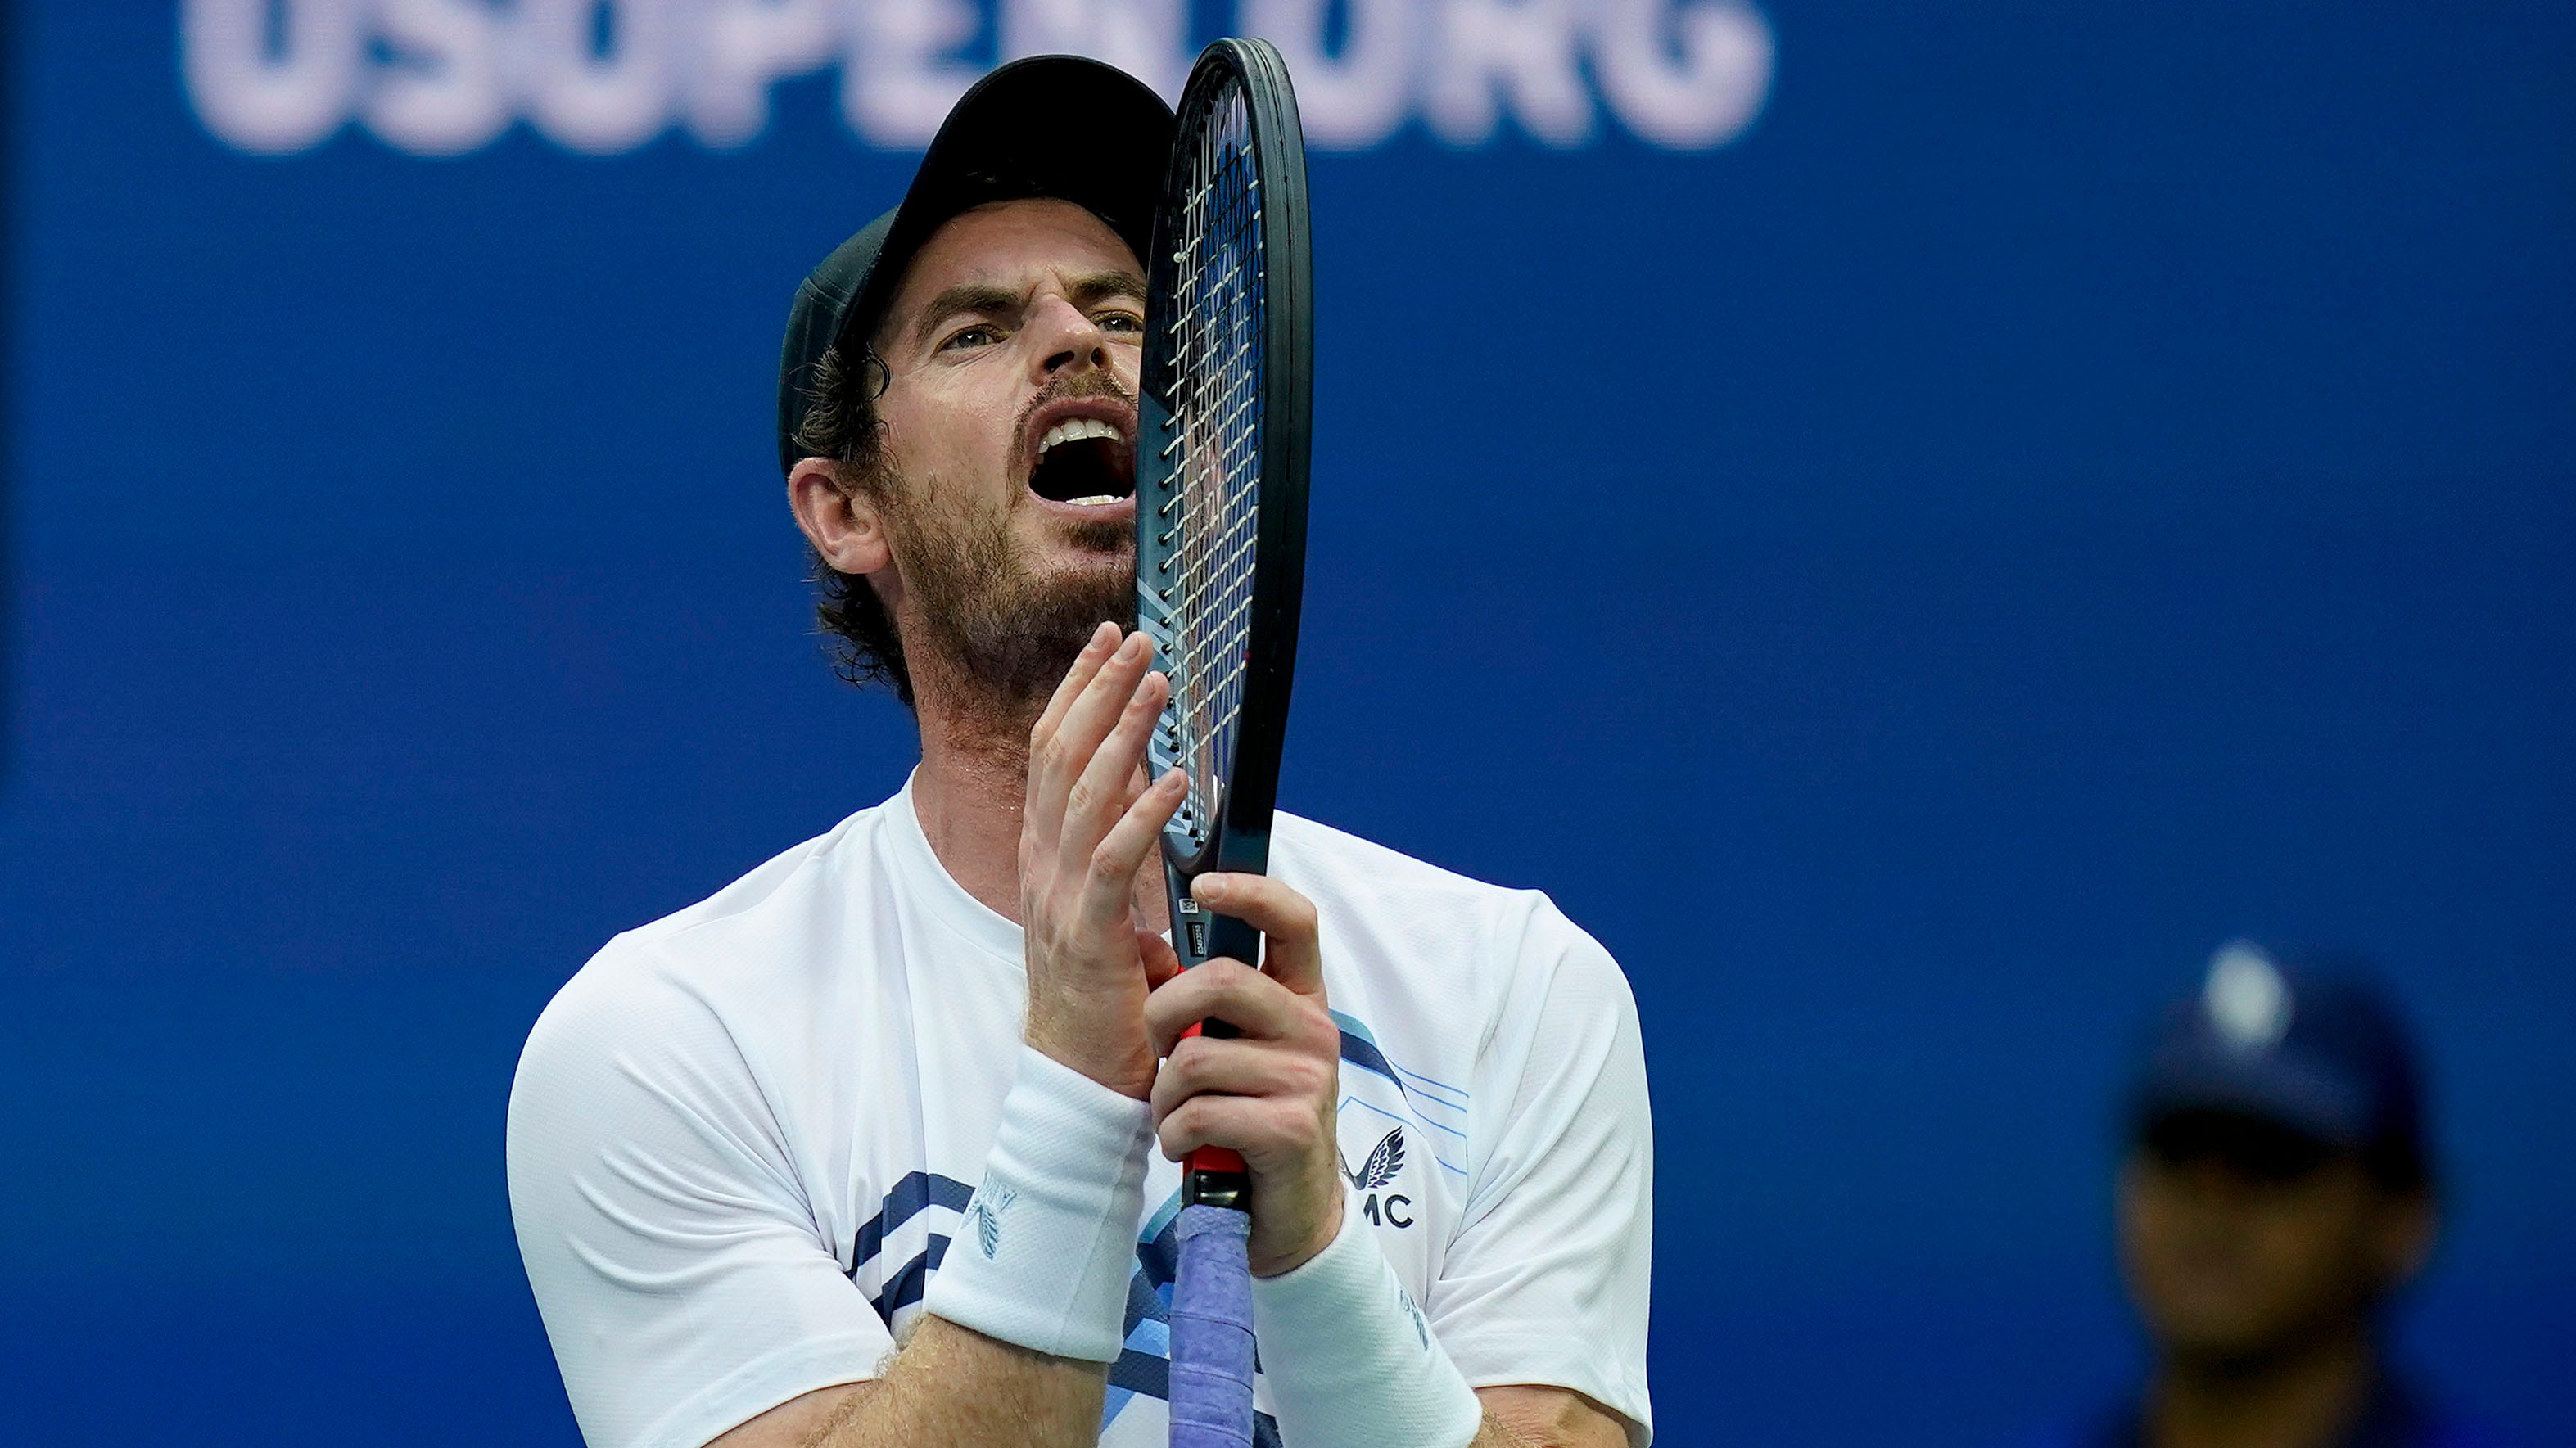 Andy Murray slams Stefanos Tsitsipas for game delays after US Open loss I lost respect for him Fox News